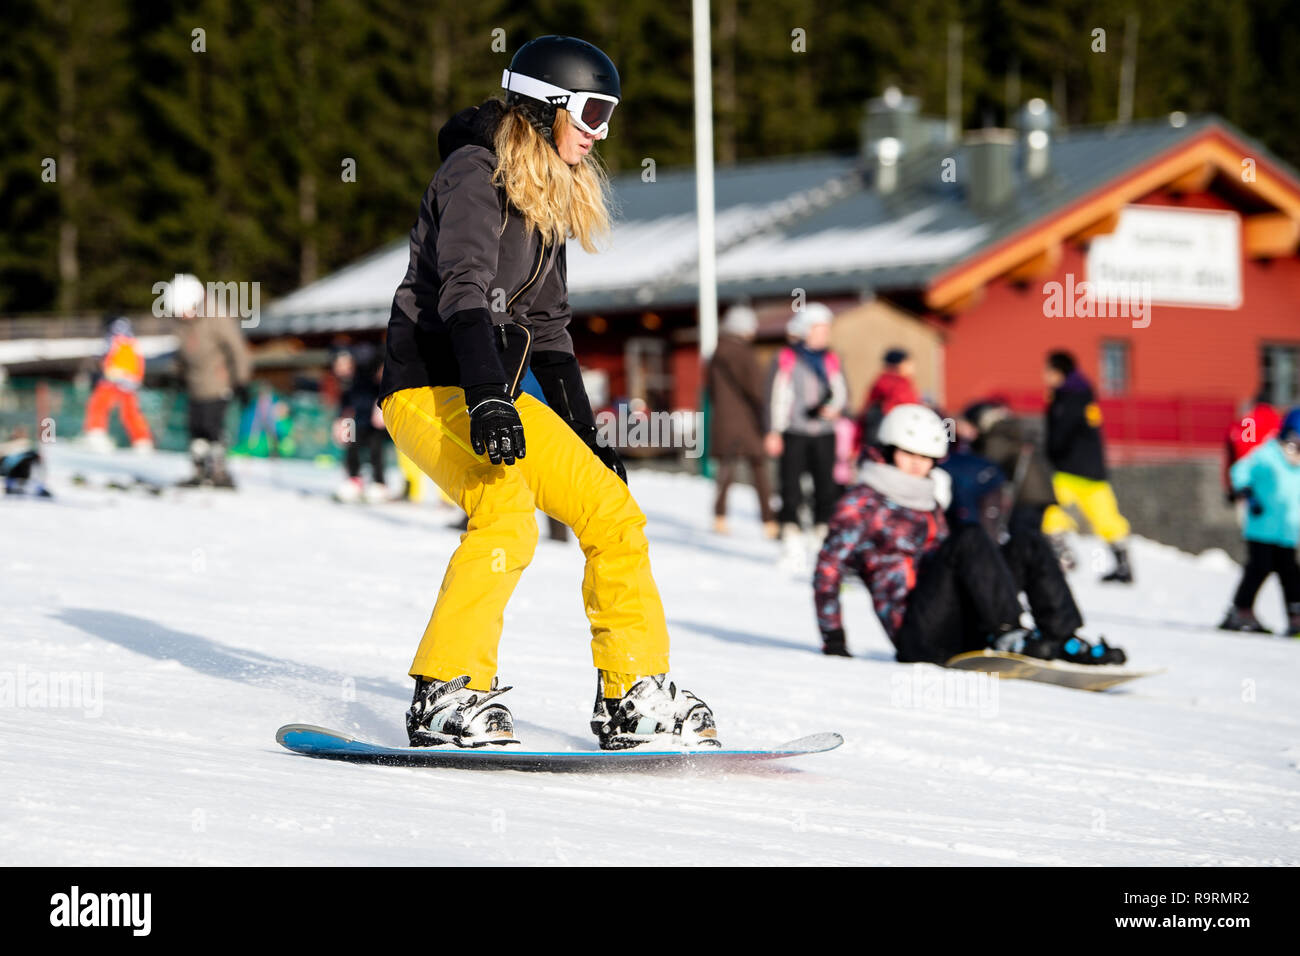 Braunlage, Germany. 27th Dec, 2018. A winter sportswoman rides a snowboard  down a hill on a witch ride. On the witch ride at Wurmberg in the Harz, the  winter sports season has